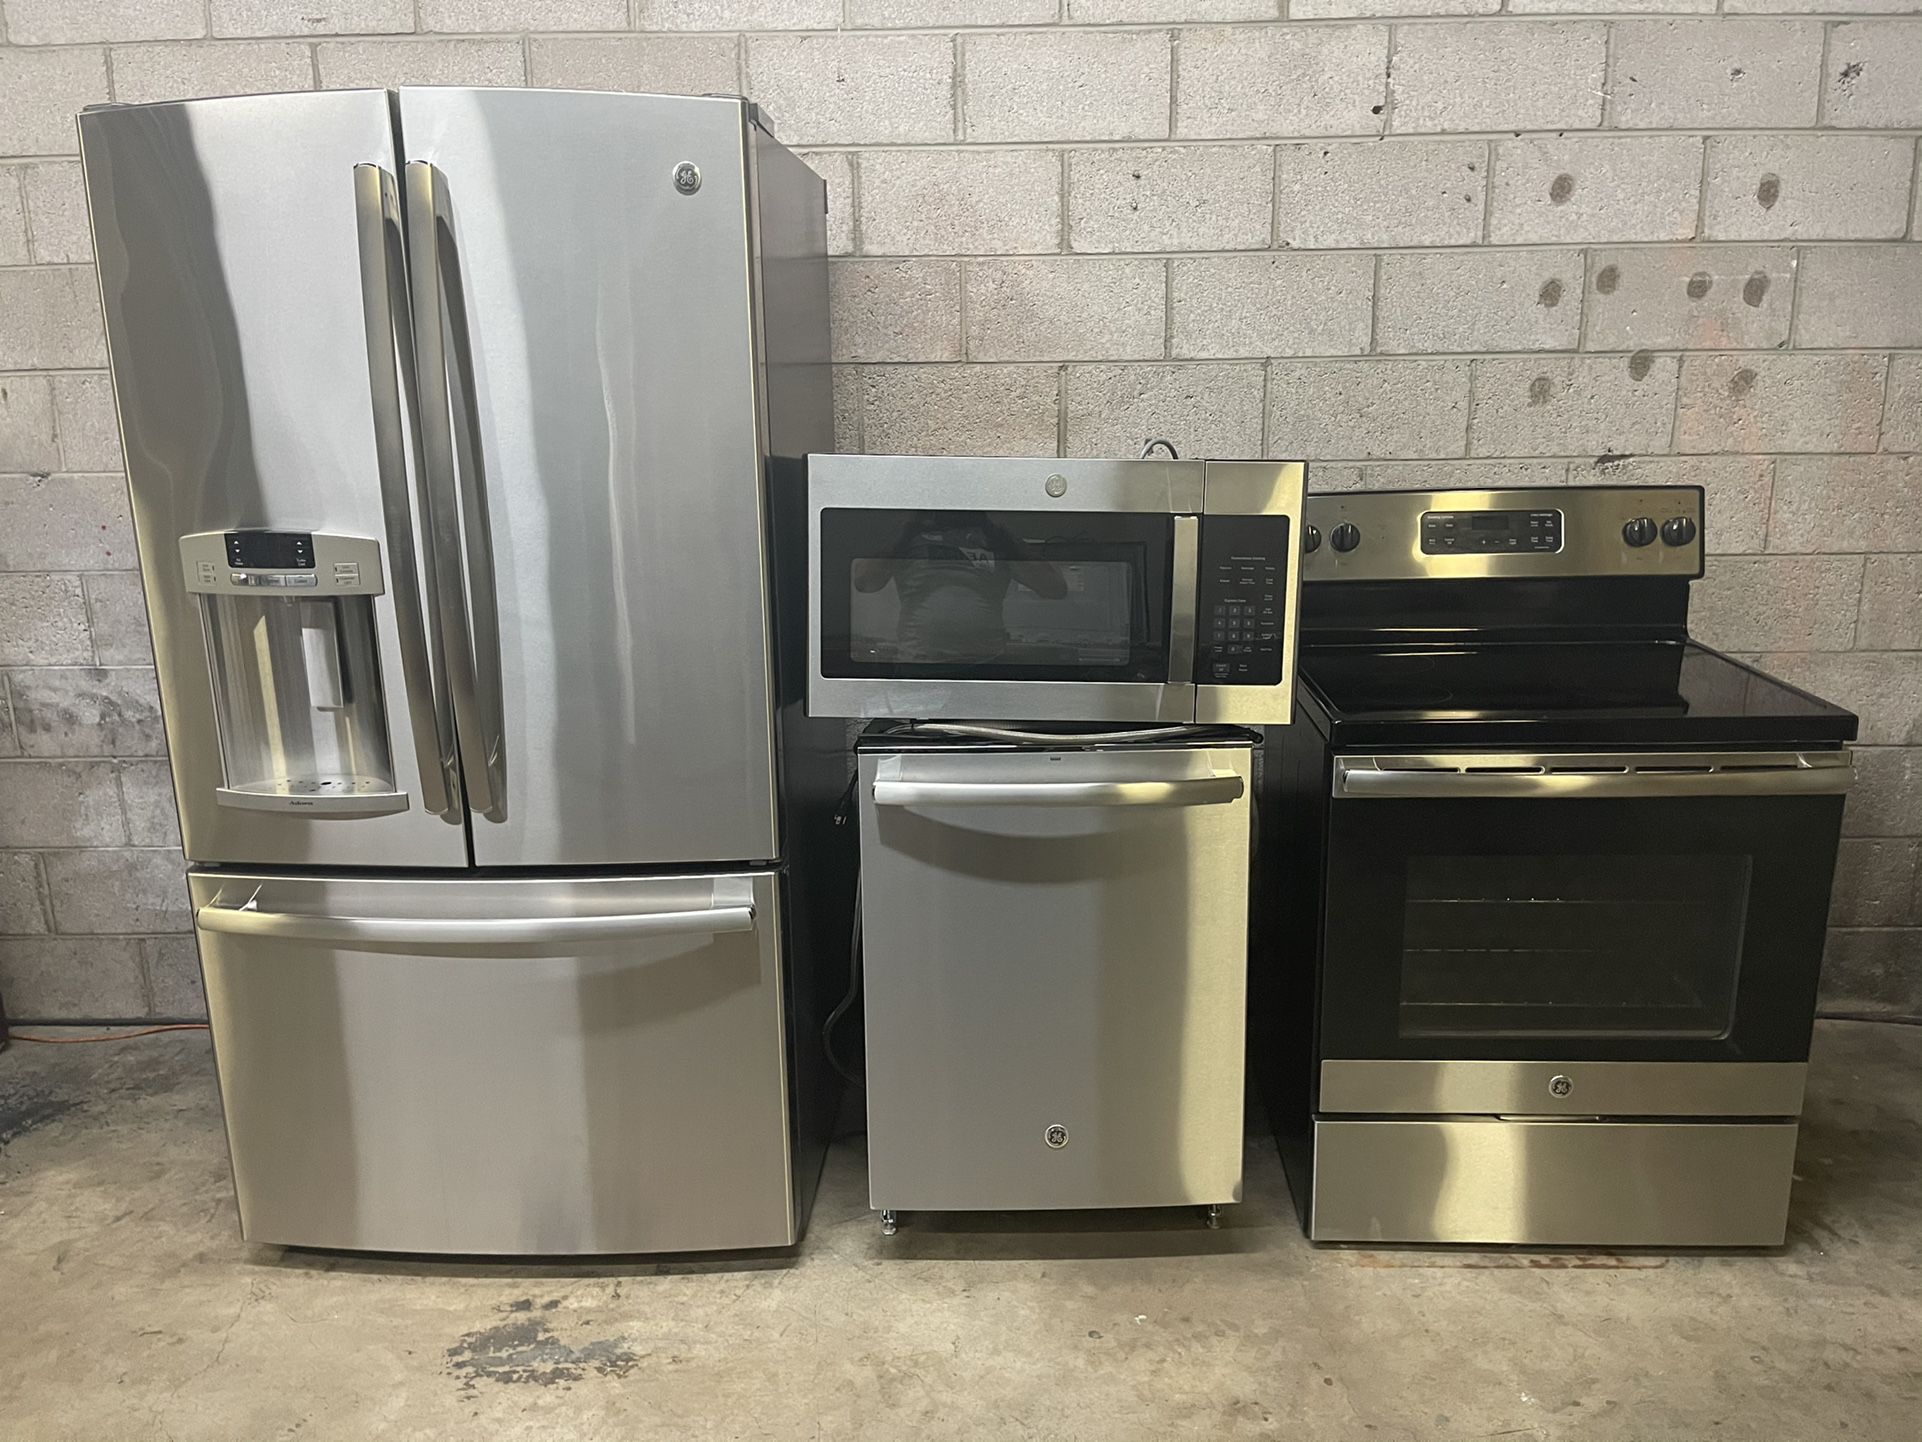 VERY NICE GE GENERAL ELECTRIC STAINLESS STEEL KITCHEN APPLIANCES SET